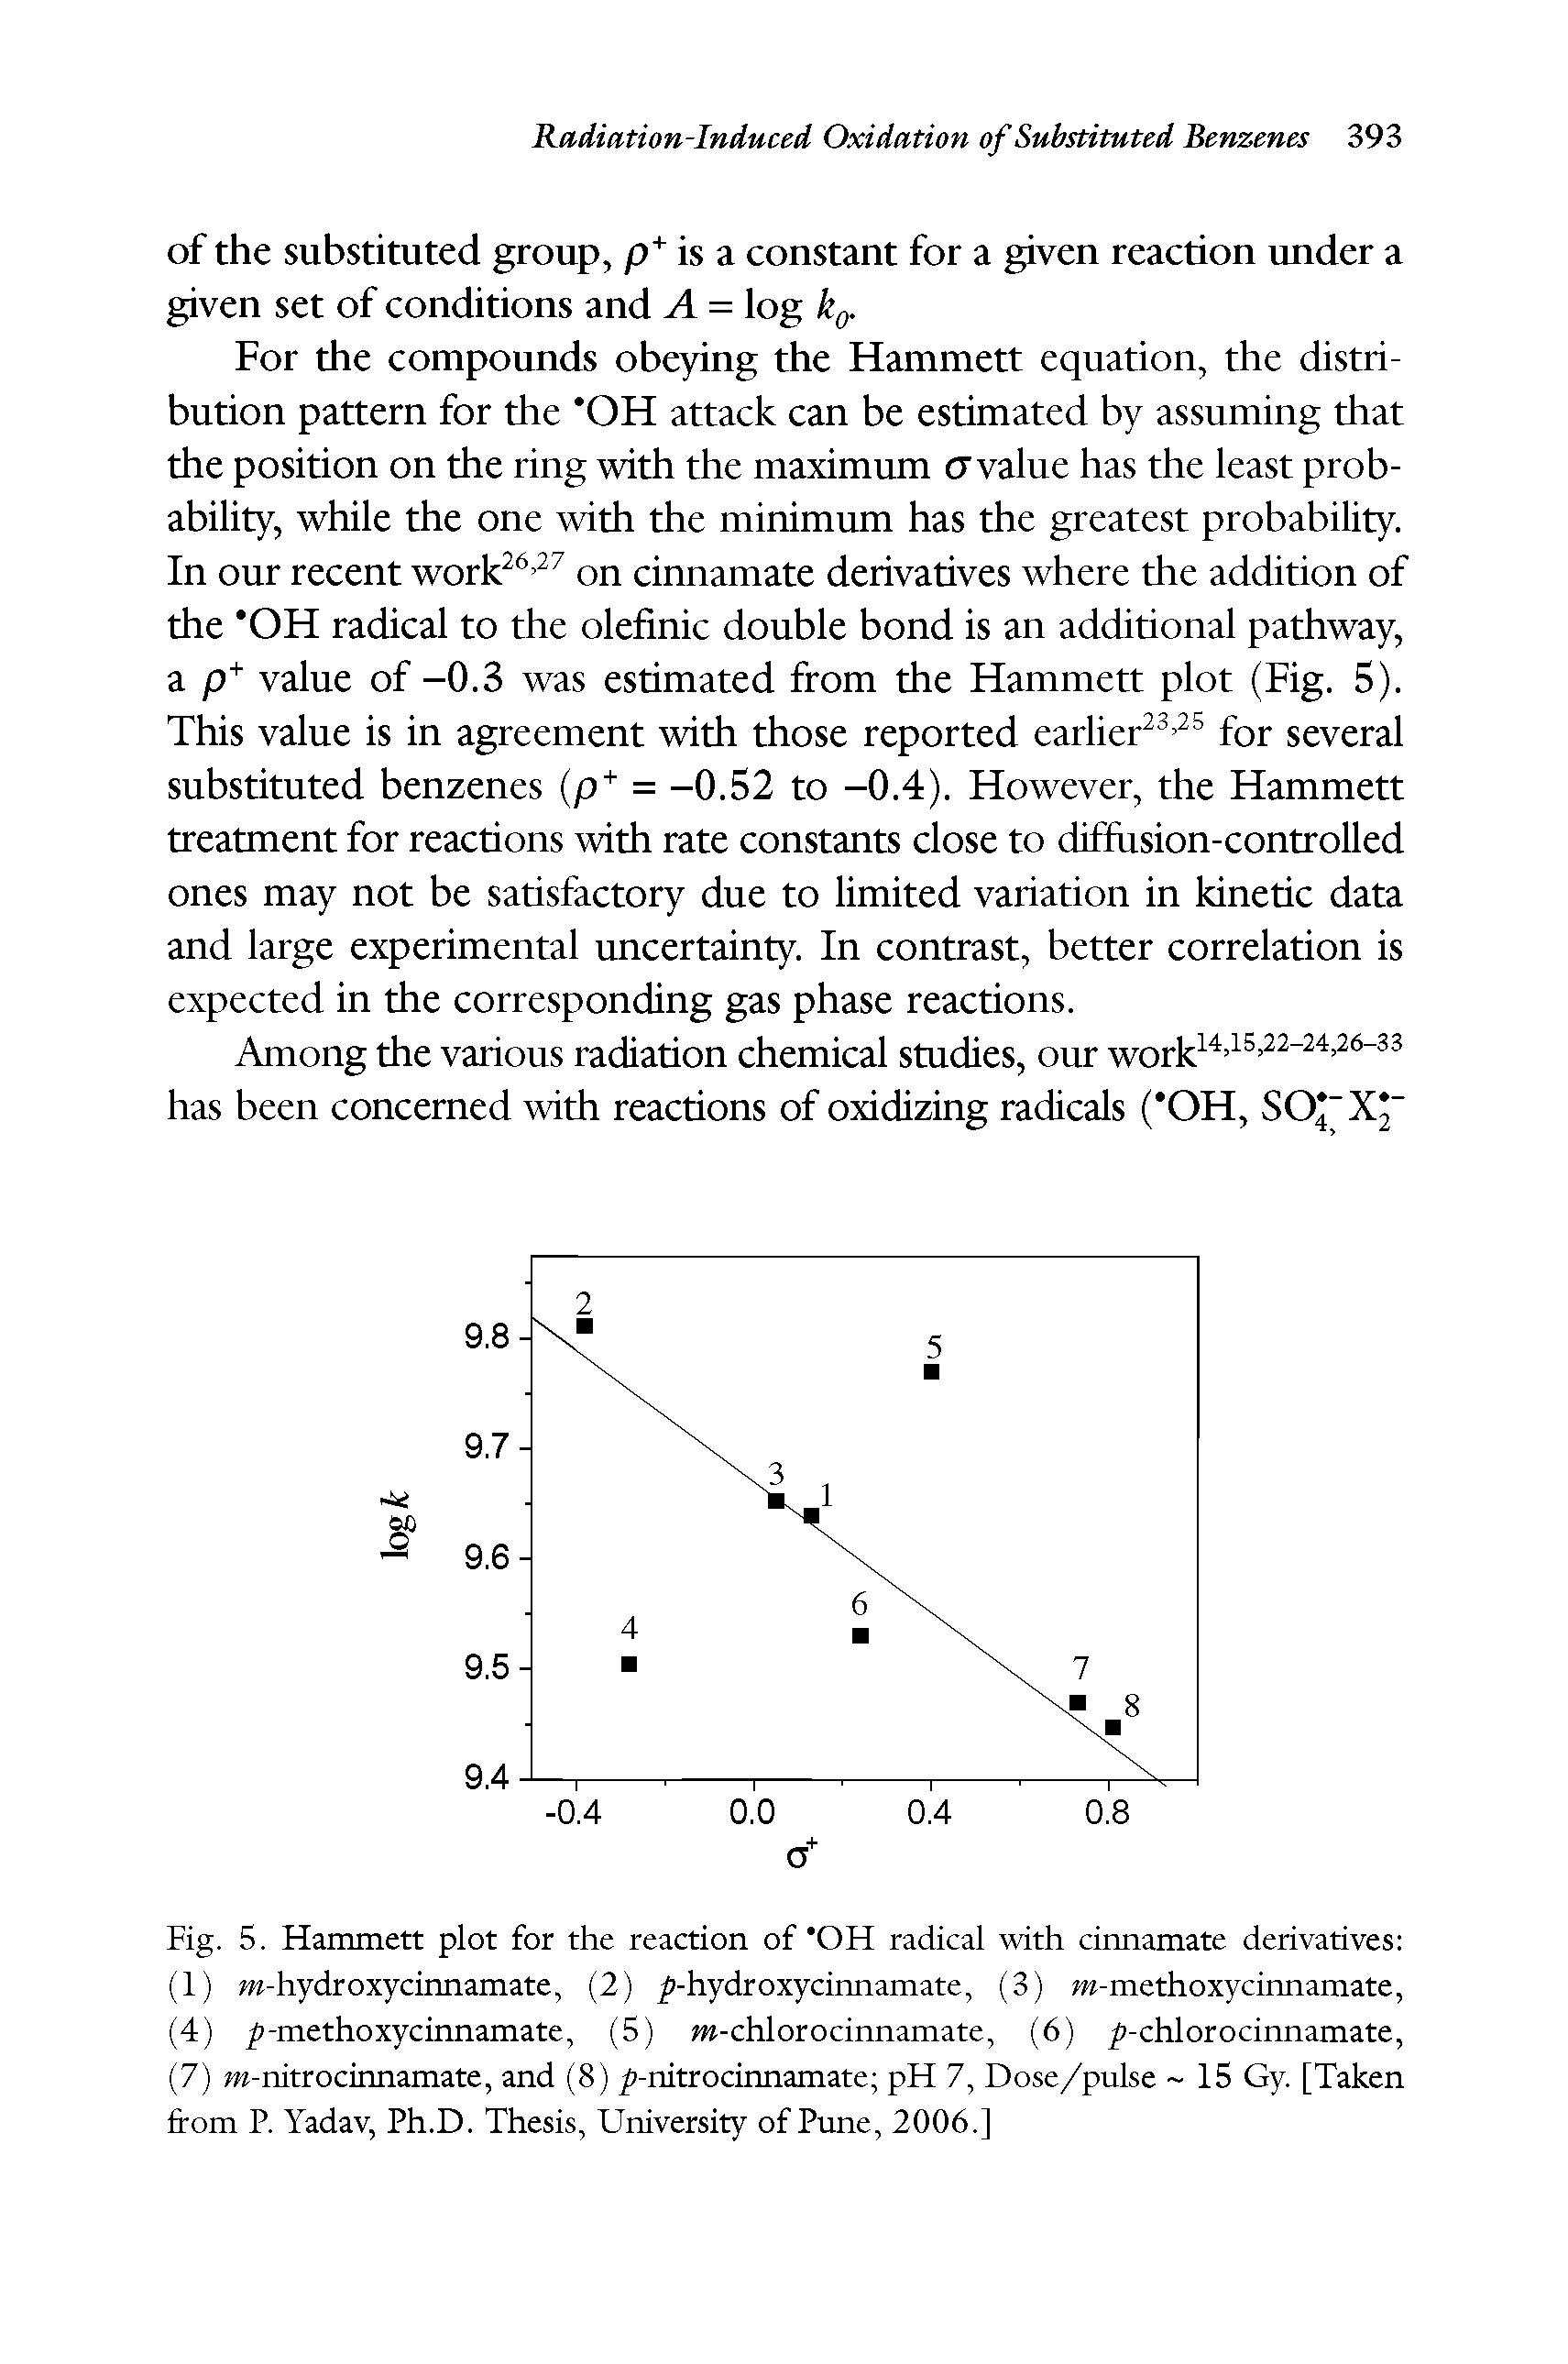 Fig. 5. Hammett plot for the reaction of "OH radical with cinnamate derivatives (1) OT-hydroxycinnamate, (2) -hydroxycinnamate, (3) w-methoxycinnamate, (4) p-methoxycinnamate, (5) w-chlorocinnamate, (6) p-chlorocinnamate, (7) OT-nitrocinnamate, and (8) p-nitrocinnamate pH 7, Dose/pulse 15 Gy. [Taken from P. Yadav, Ph.D. Thesis, University of Pune, 2006.]...